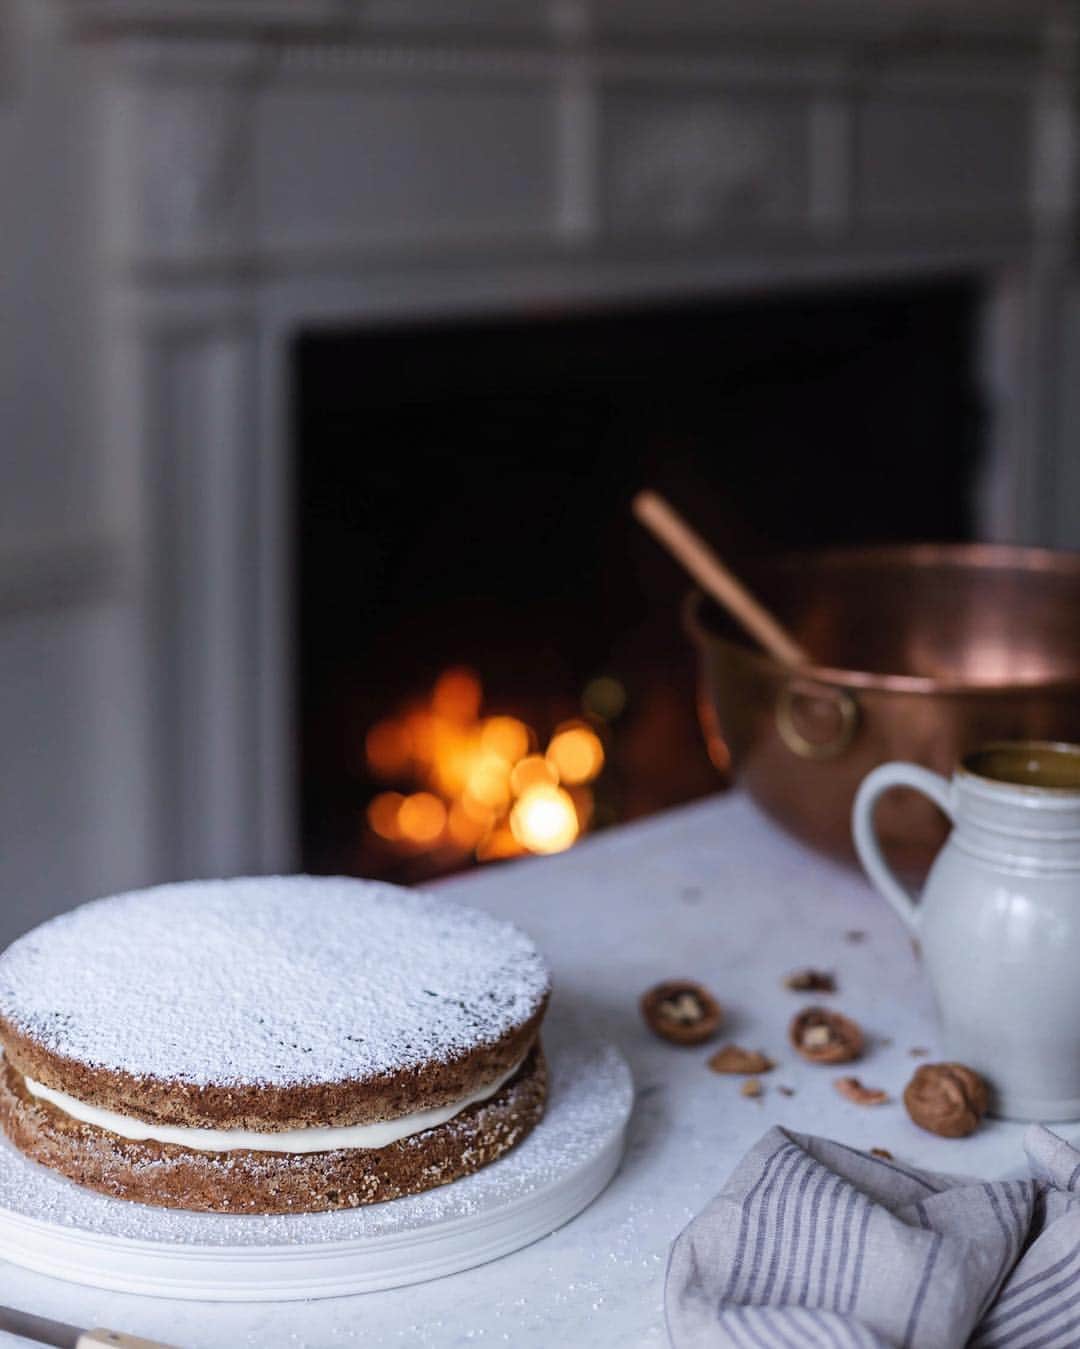 Krissyのインスタグラム：「I’m so very much in love with this simple parsnip cake (yes, parsnip) it’s beautifully spiced and makes for the perfect companion to a cup of black tea on these still wintry afternoons - I’ll put a link in profile- . the recipe is from my @yankeemagazine column in this March/April issue. I was excited to use one of my favorite New England delicacies - spring dug parsnips - in a slightly less expected way. Though they are still wonderful pan fried in a little butter with some chopped toasted hazelnuts . . . . . #parsnipcake #yankeemagazine #mynewengland #eleganceintheeveryday #myeverydaymagic #simplejoys #embracingtheseasons #thebakefeed #poetryofsimplethings #farmtotable #madefromscratch #makeitdelicious #flashesofdelight #rslove #eattheworld #onmytable #momentsofmine #cakesofinstagram」